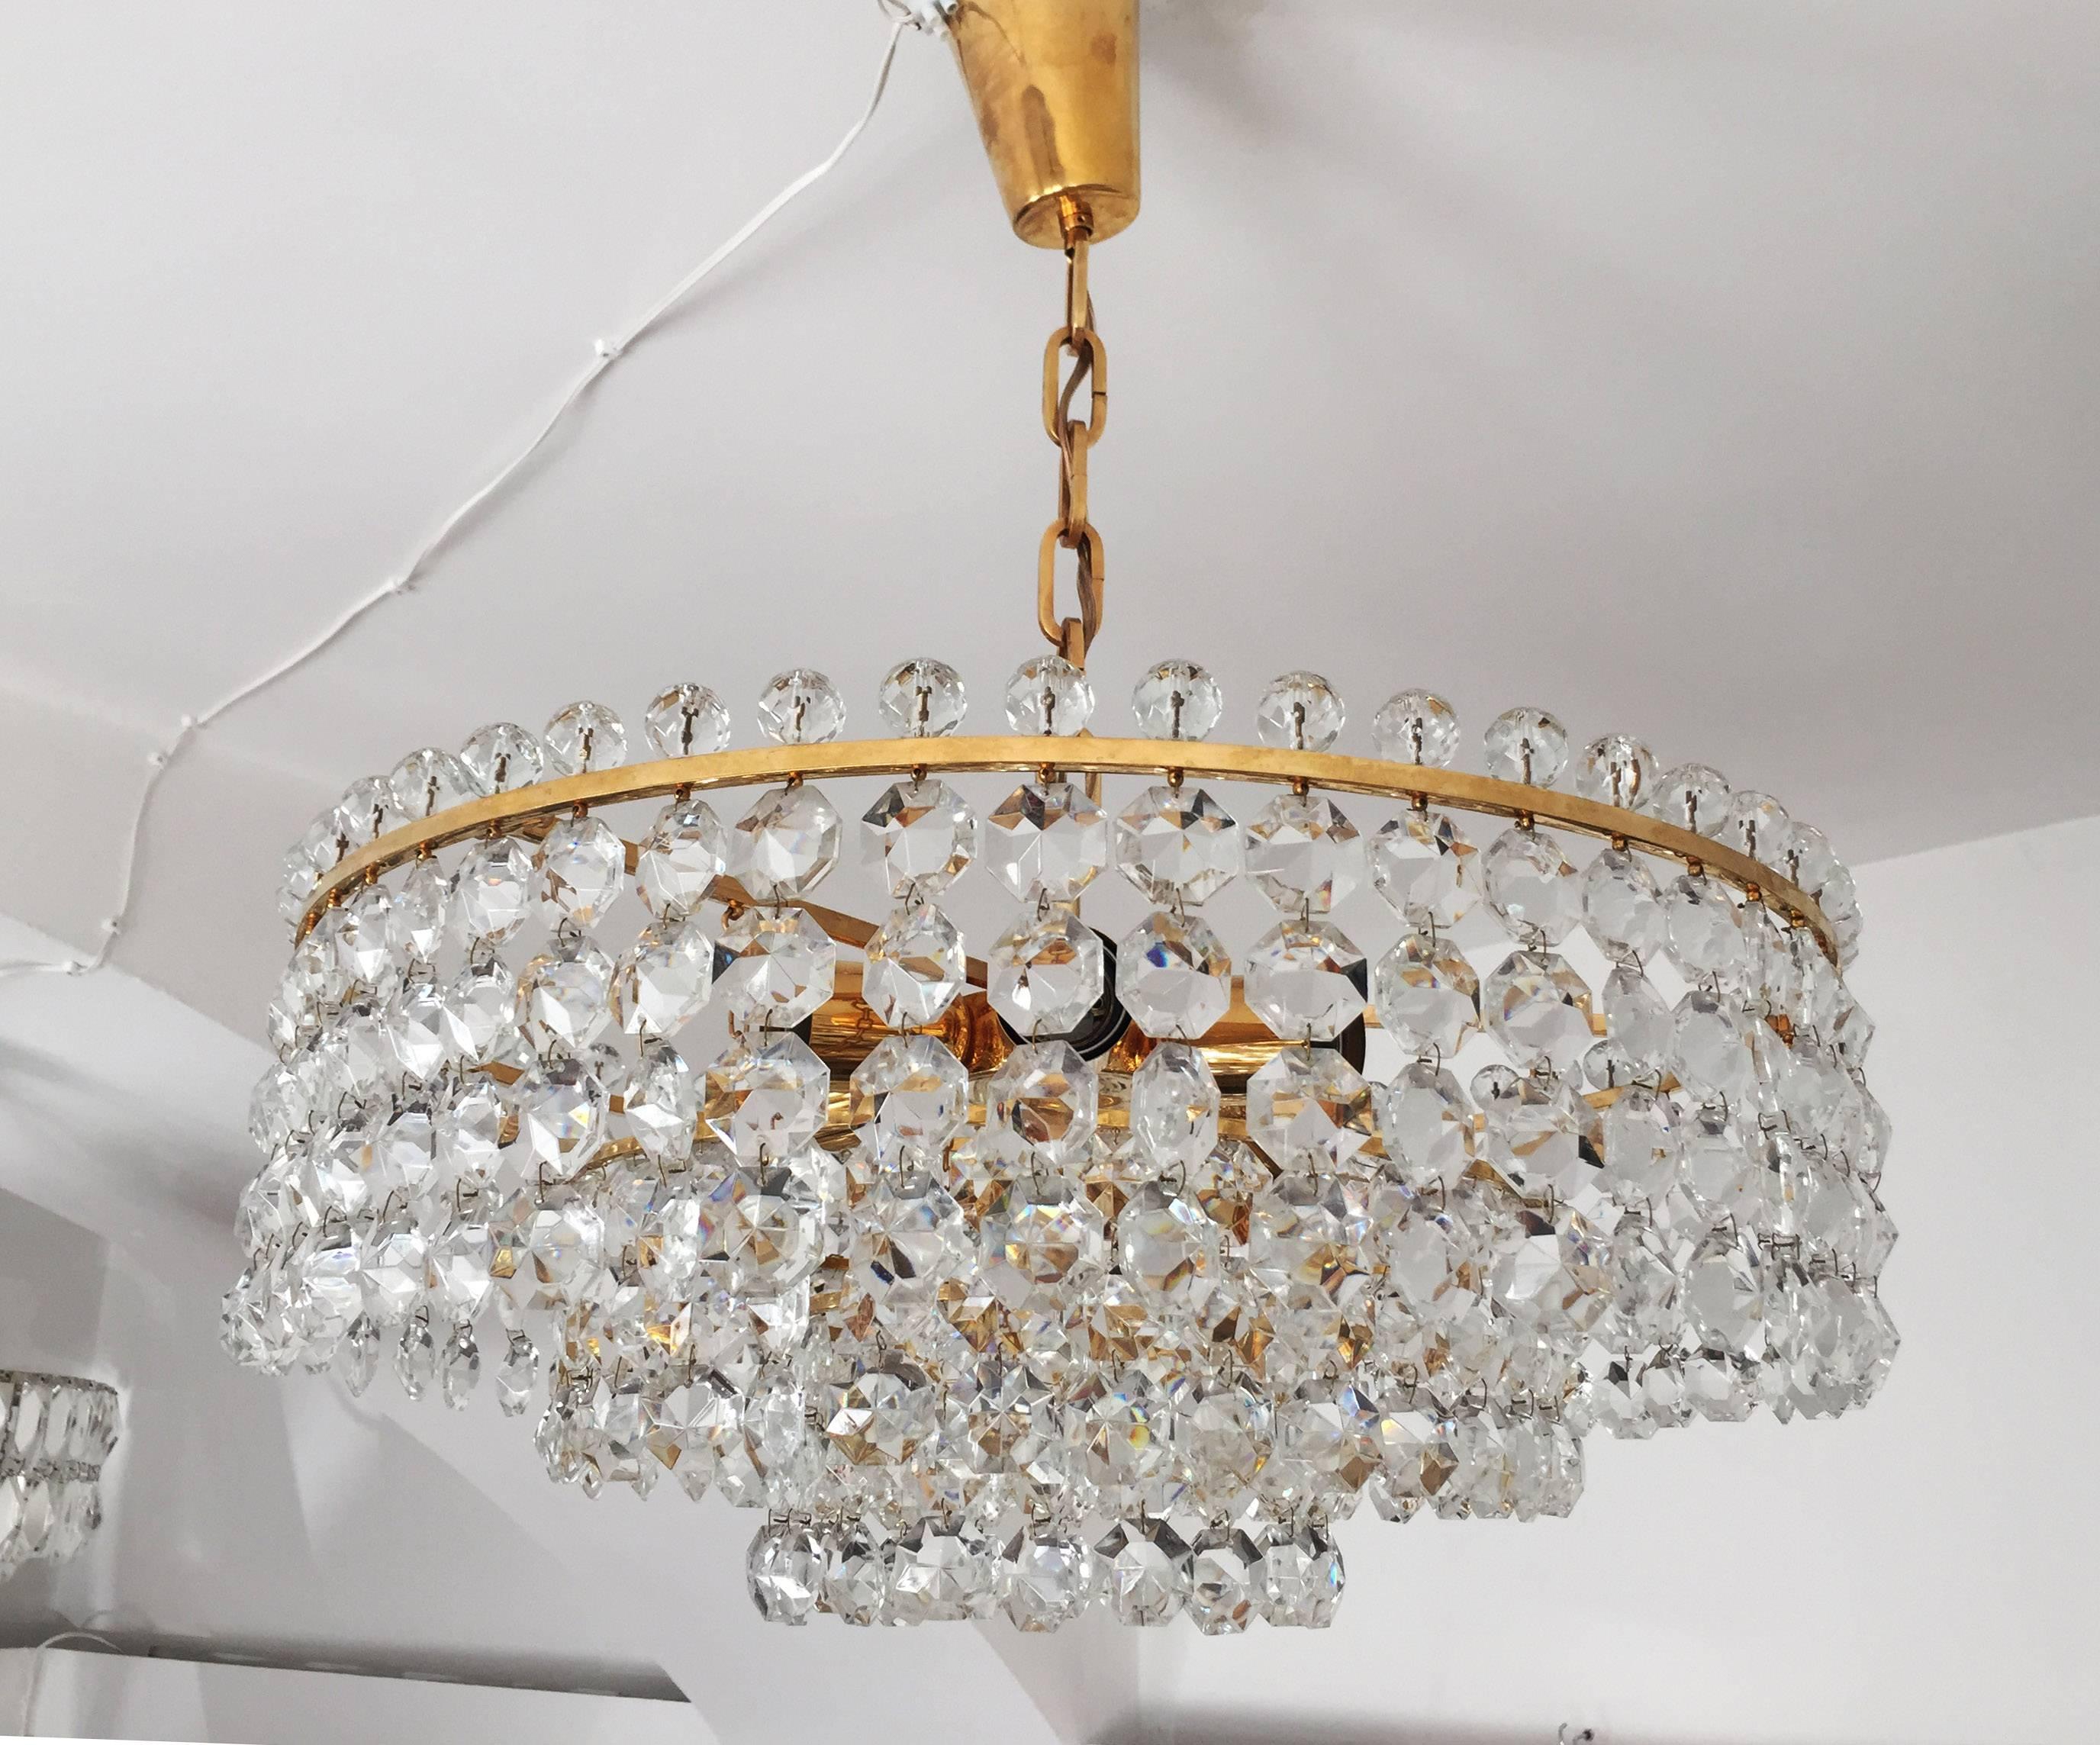 Three layers brass construction gold plated with cut crystal elements (octagons and pearls) fitted with six E27 sockets up to 60 watts each.
Made in Vienna in the 1960s by Bakalowits & Sohne.
Dimension of the chandelier only is: diameter 51 cm